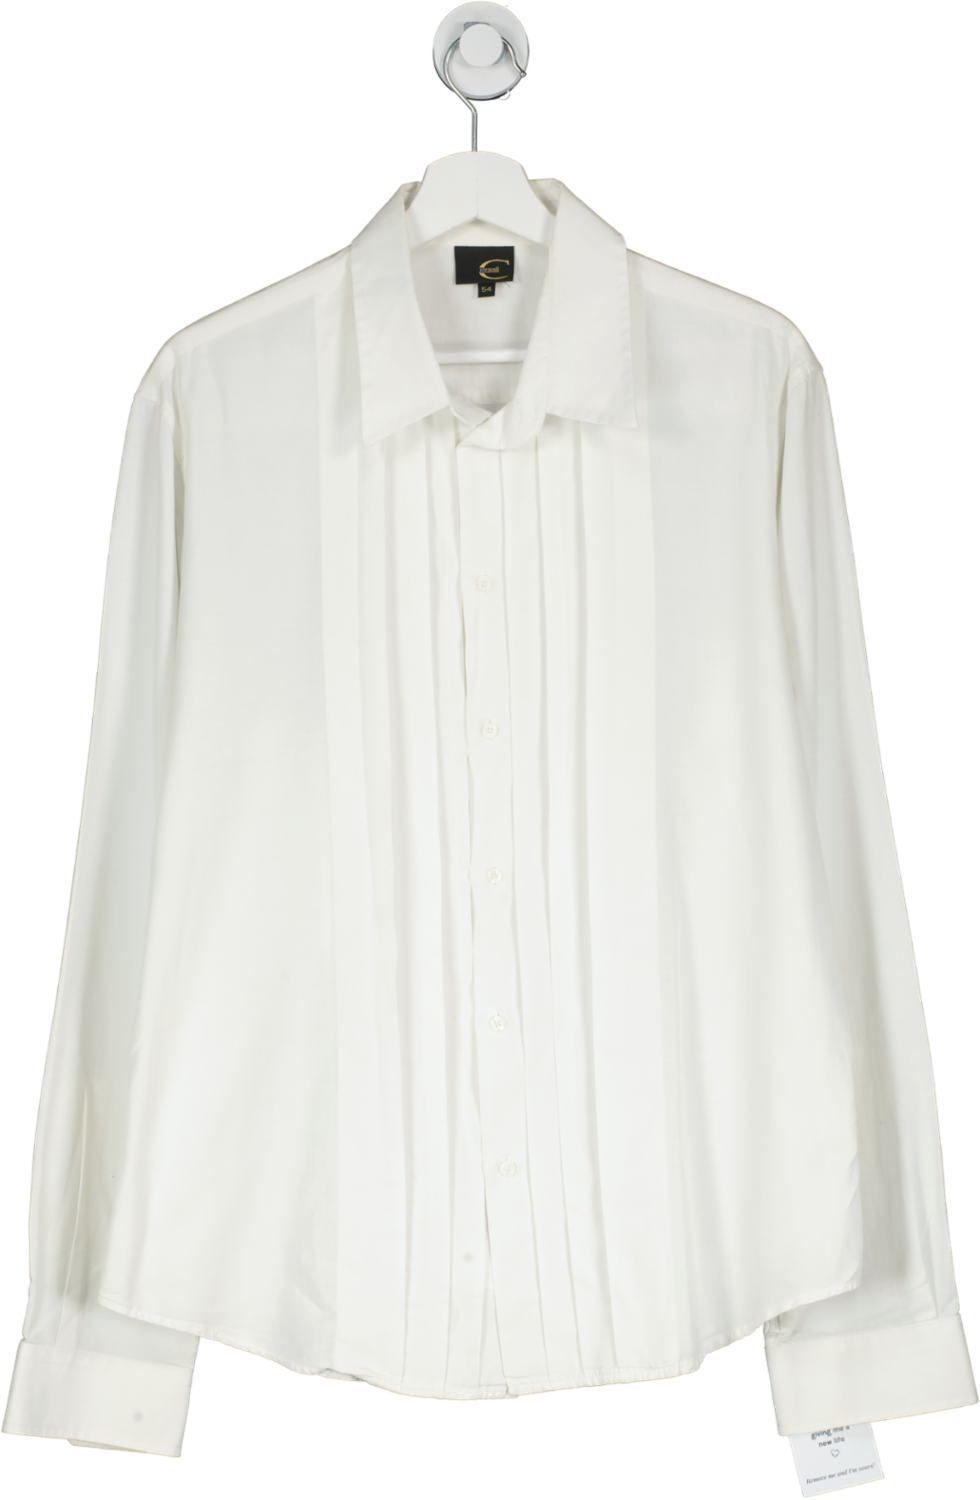 Just Cavalli White Embroidered Slim Fit Shirt UK 44" CHEST